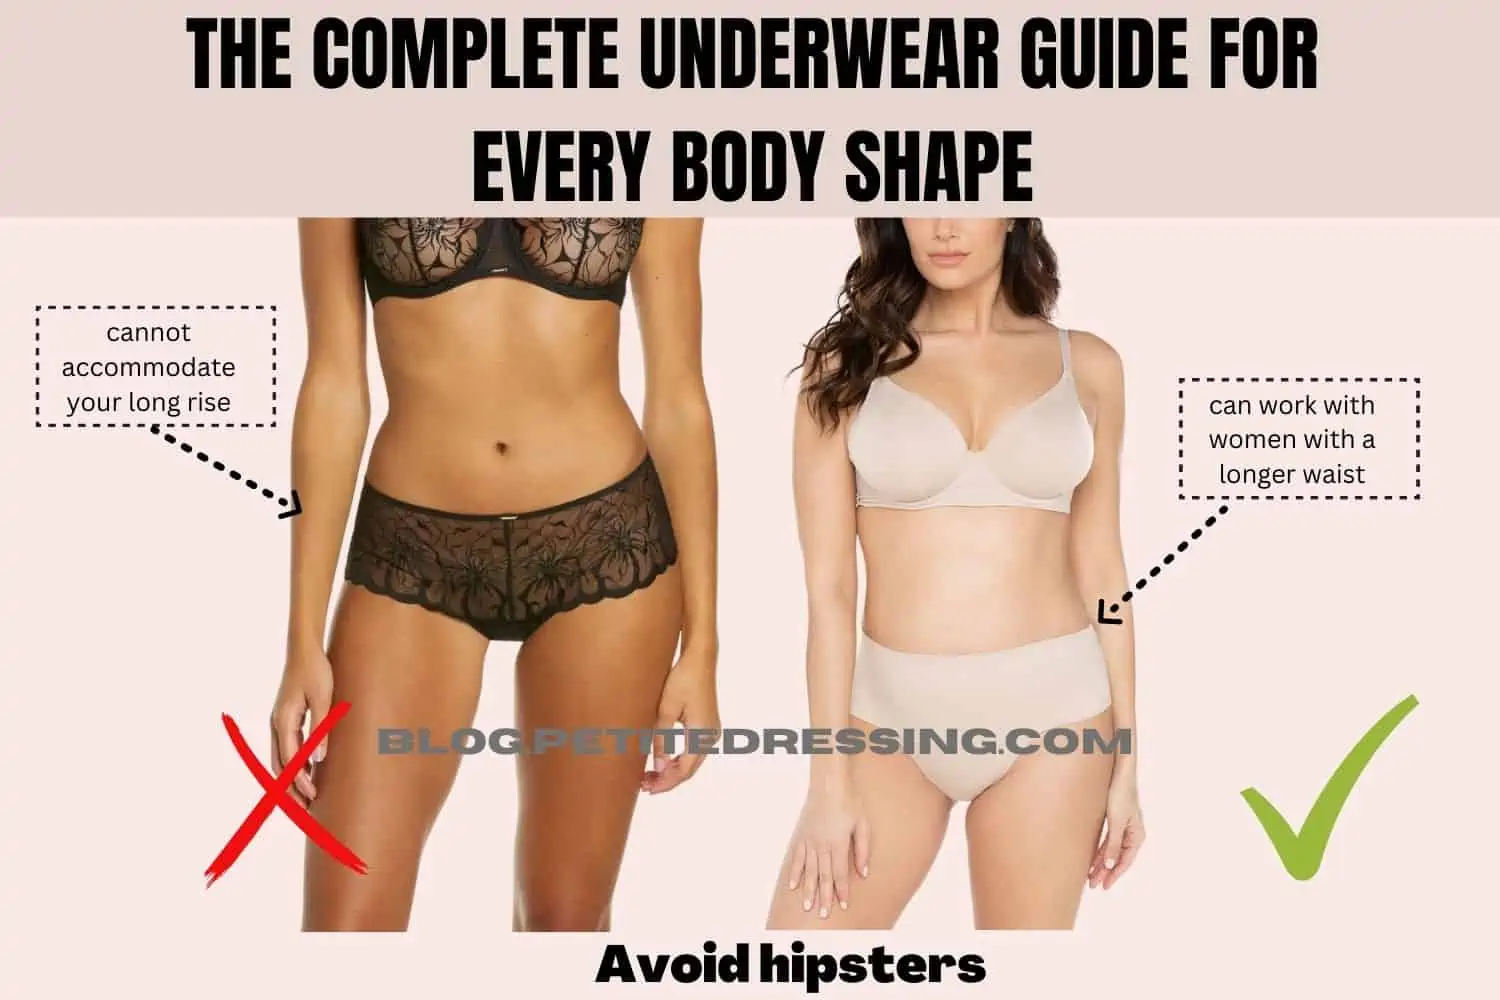 The Best Underwear for Women to Fit All Body Types